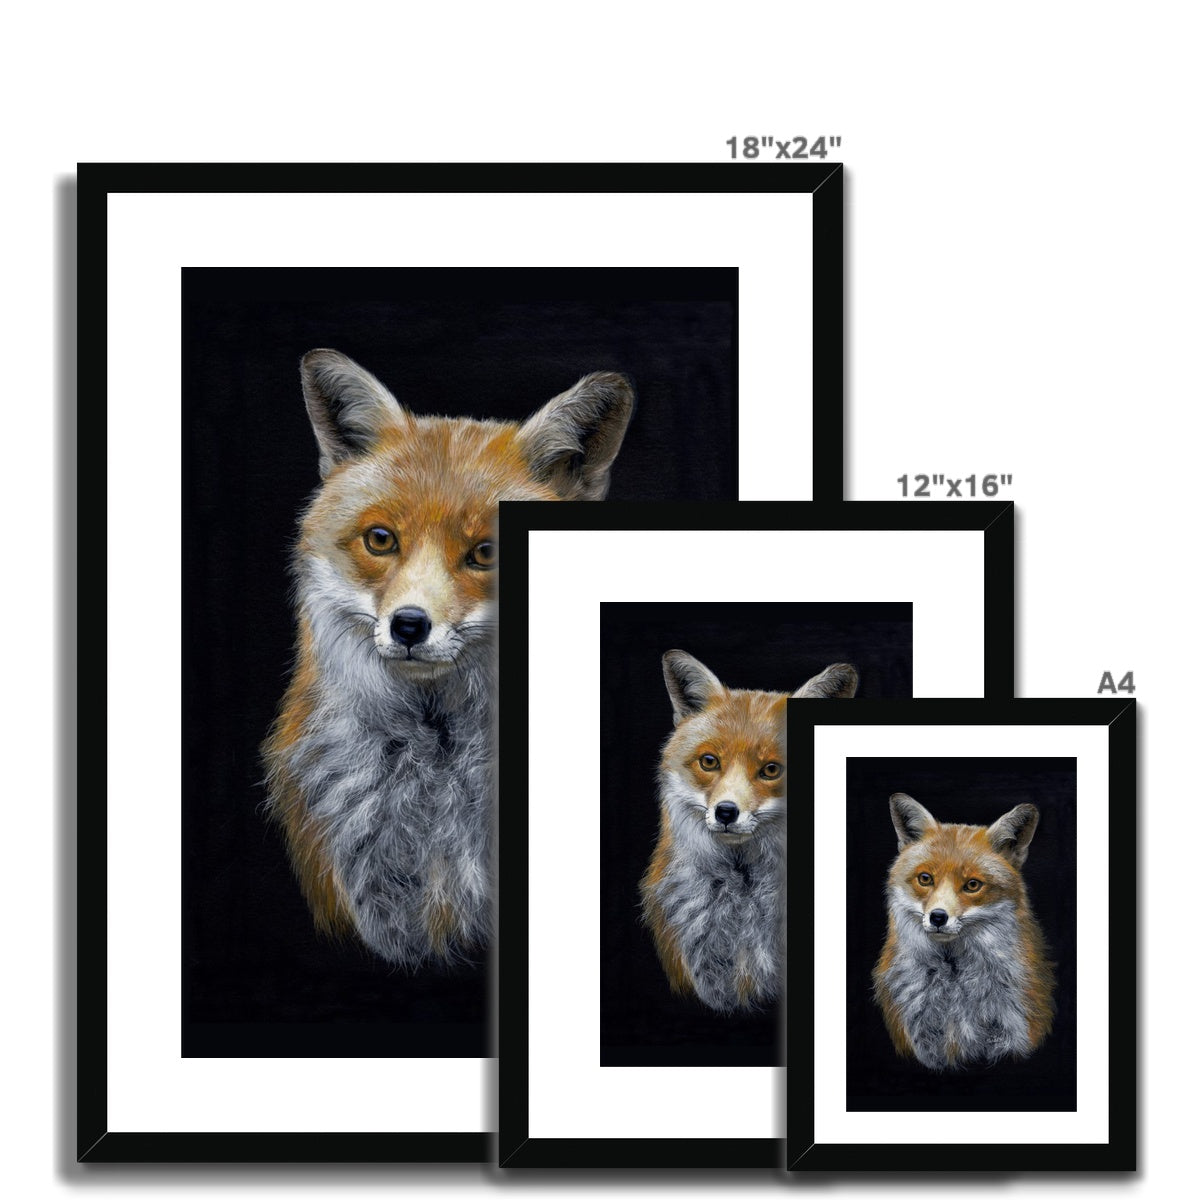 Red Fox Framed & Mounted Print